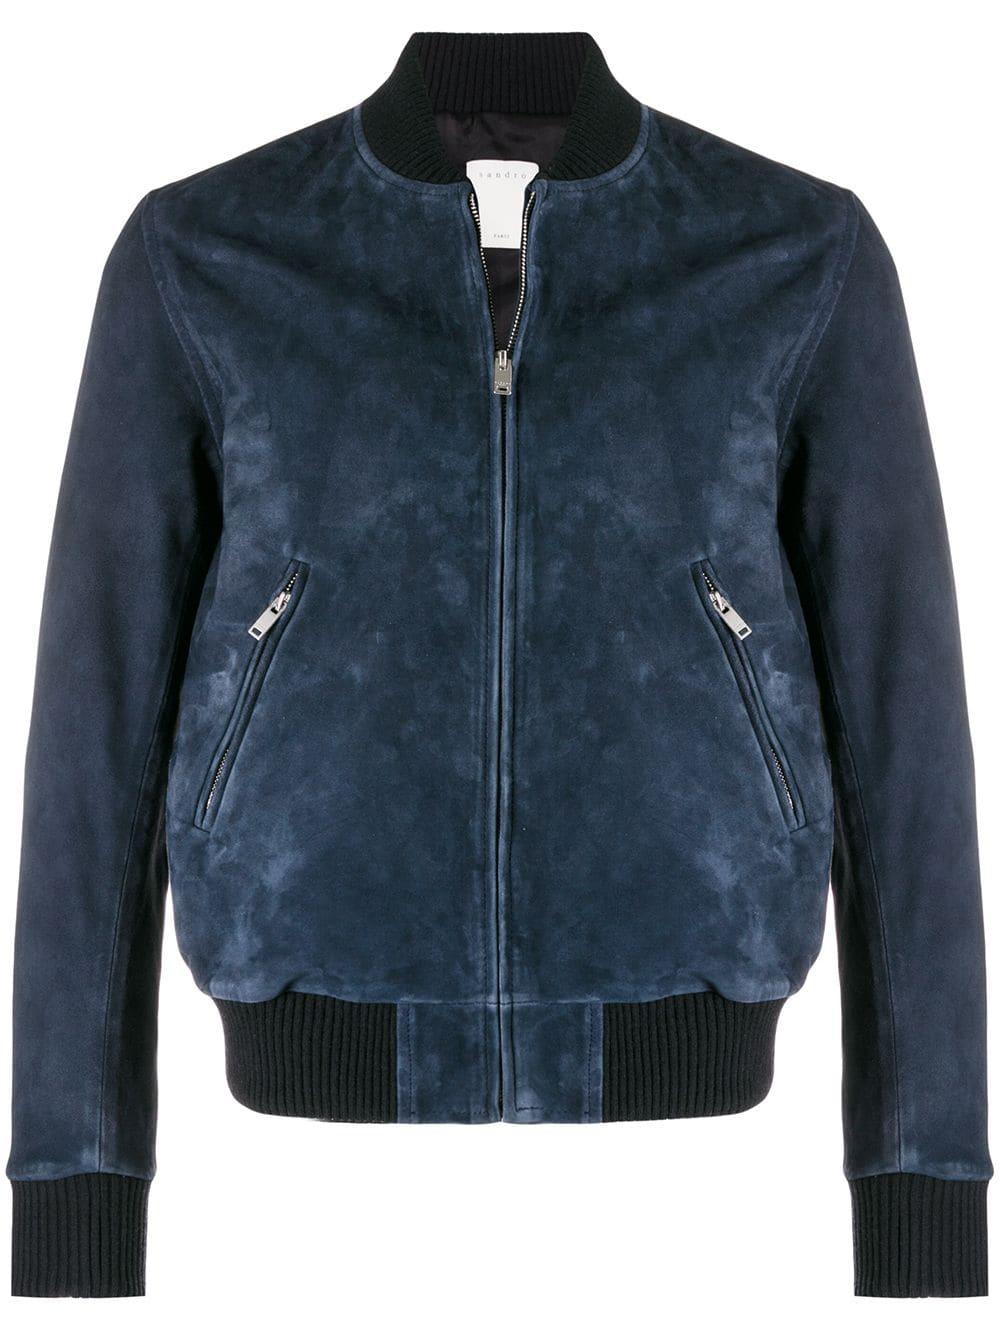 Sandro Suede Classic Bomber Jacket in Blue for Men - Lyst